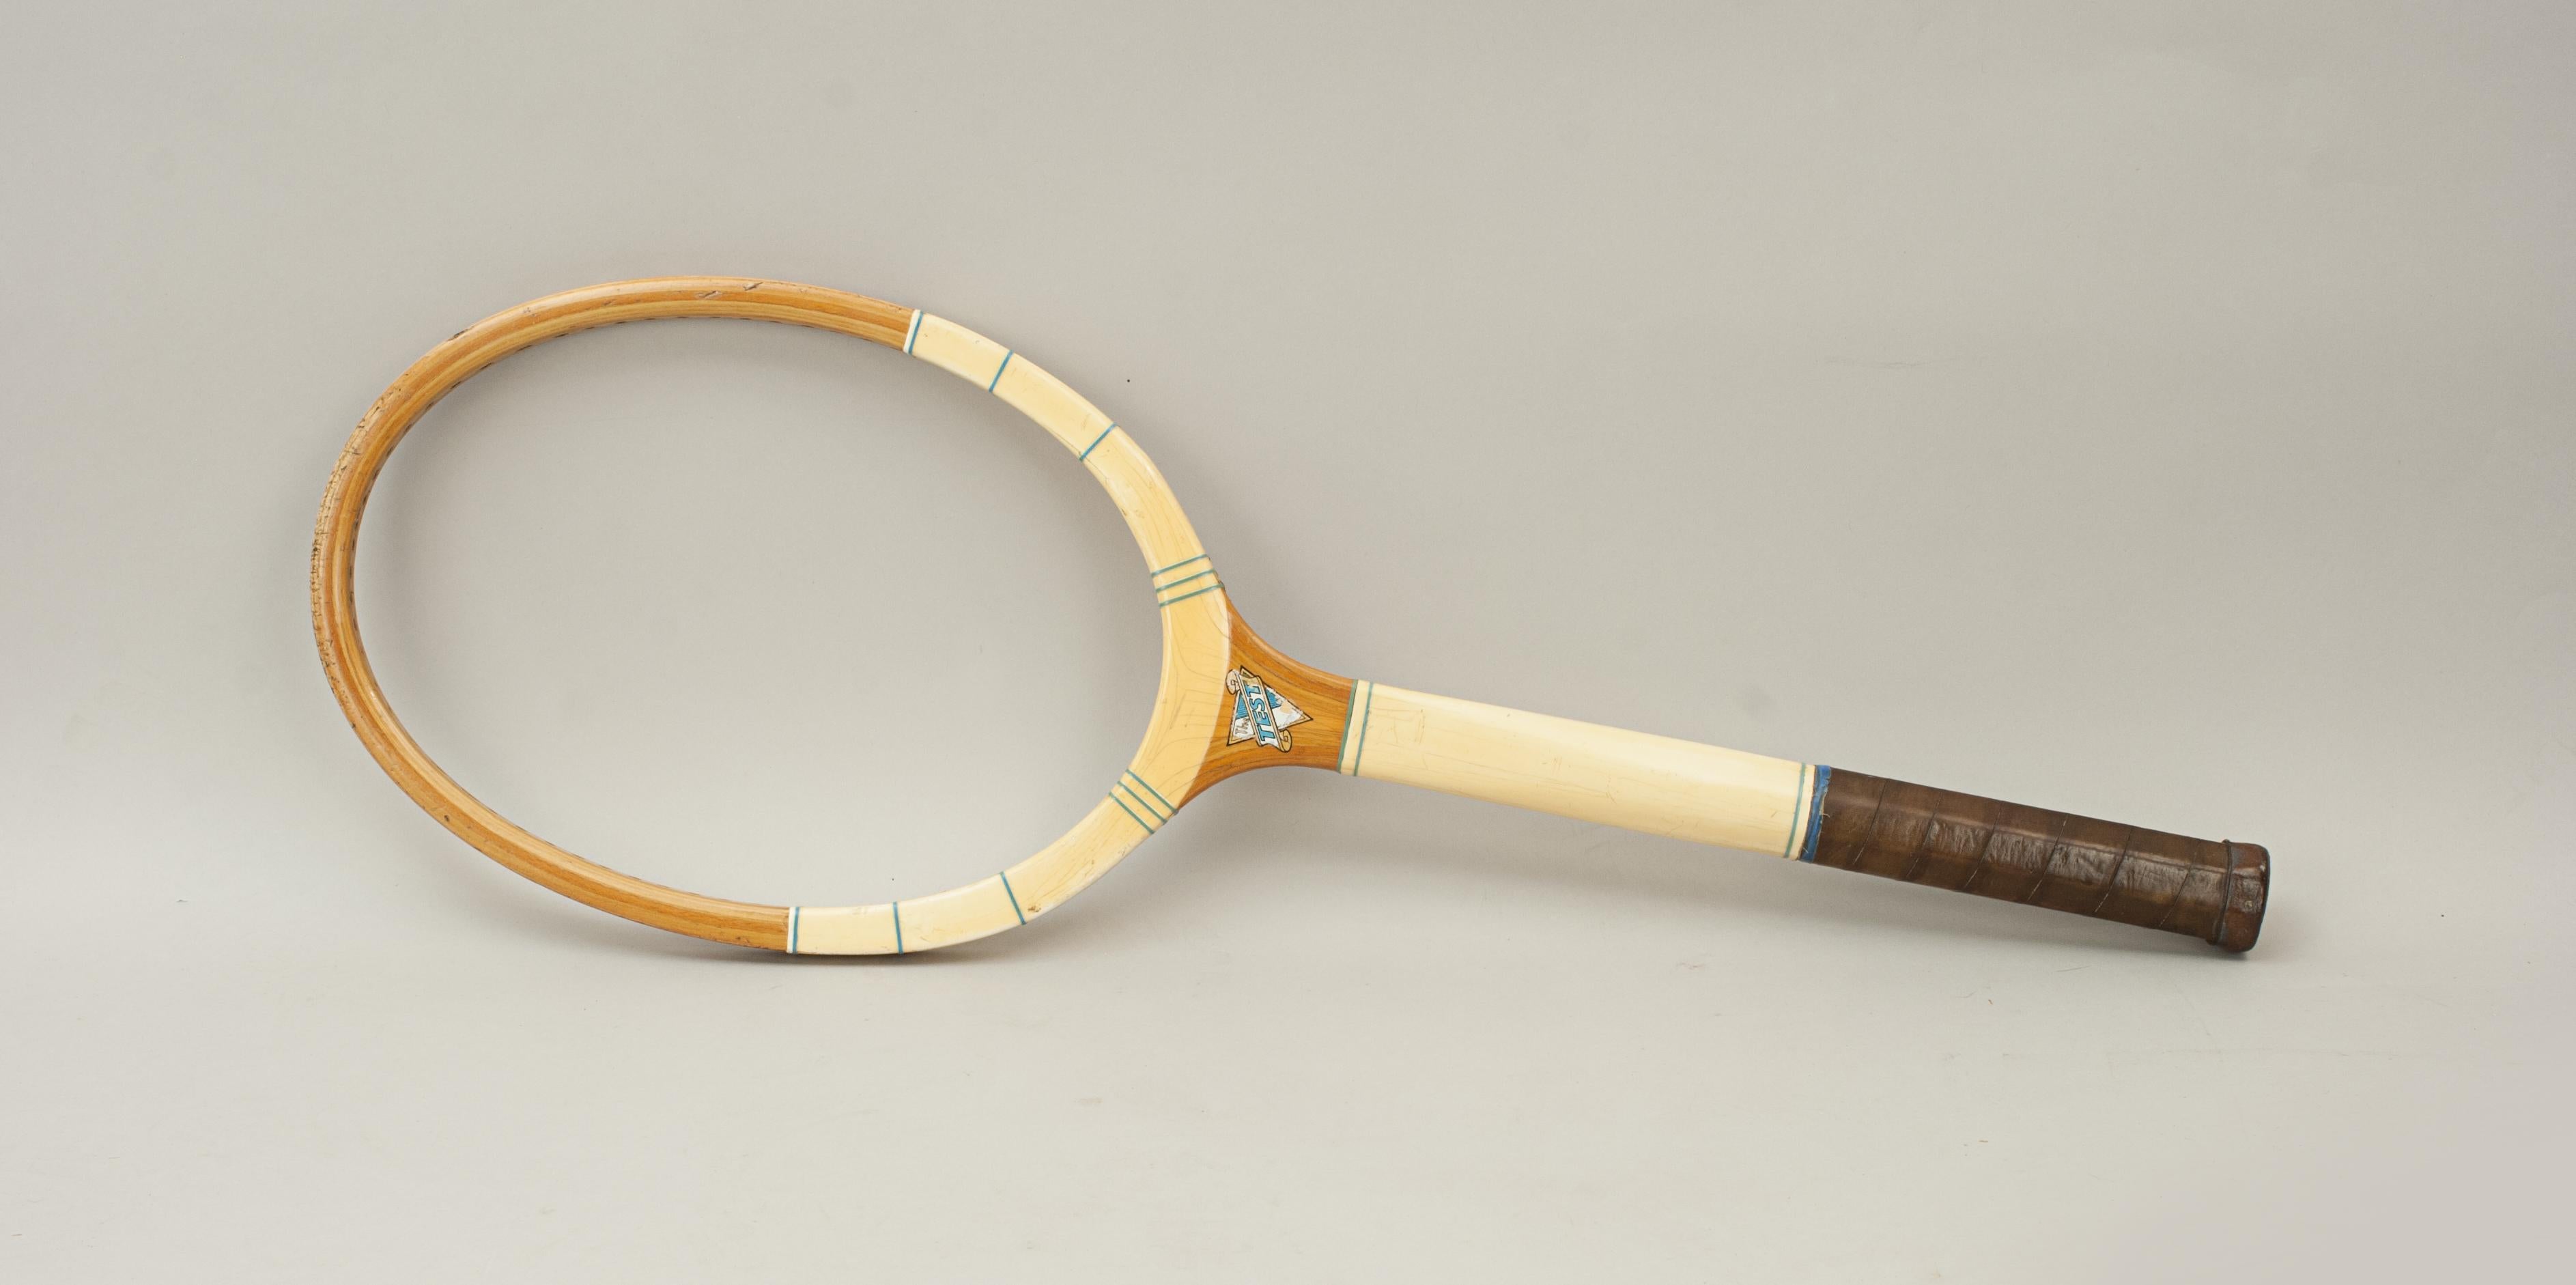 The test wooden framed lawn tennis racket.
A good wooden laminated framed tennis racket called The 'TEST'. The throat with colourful decal one side, The 